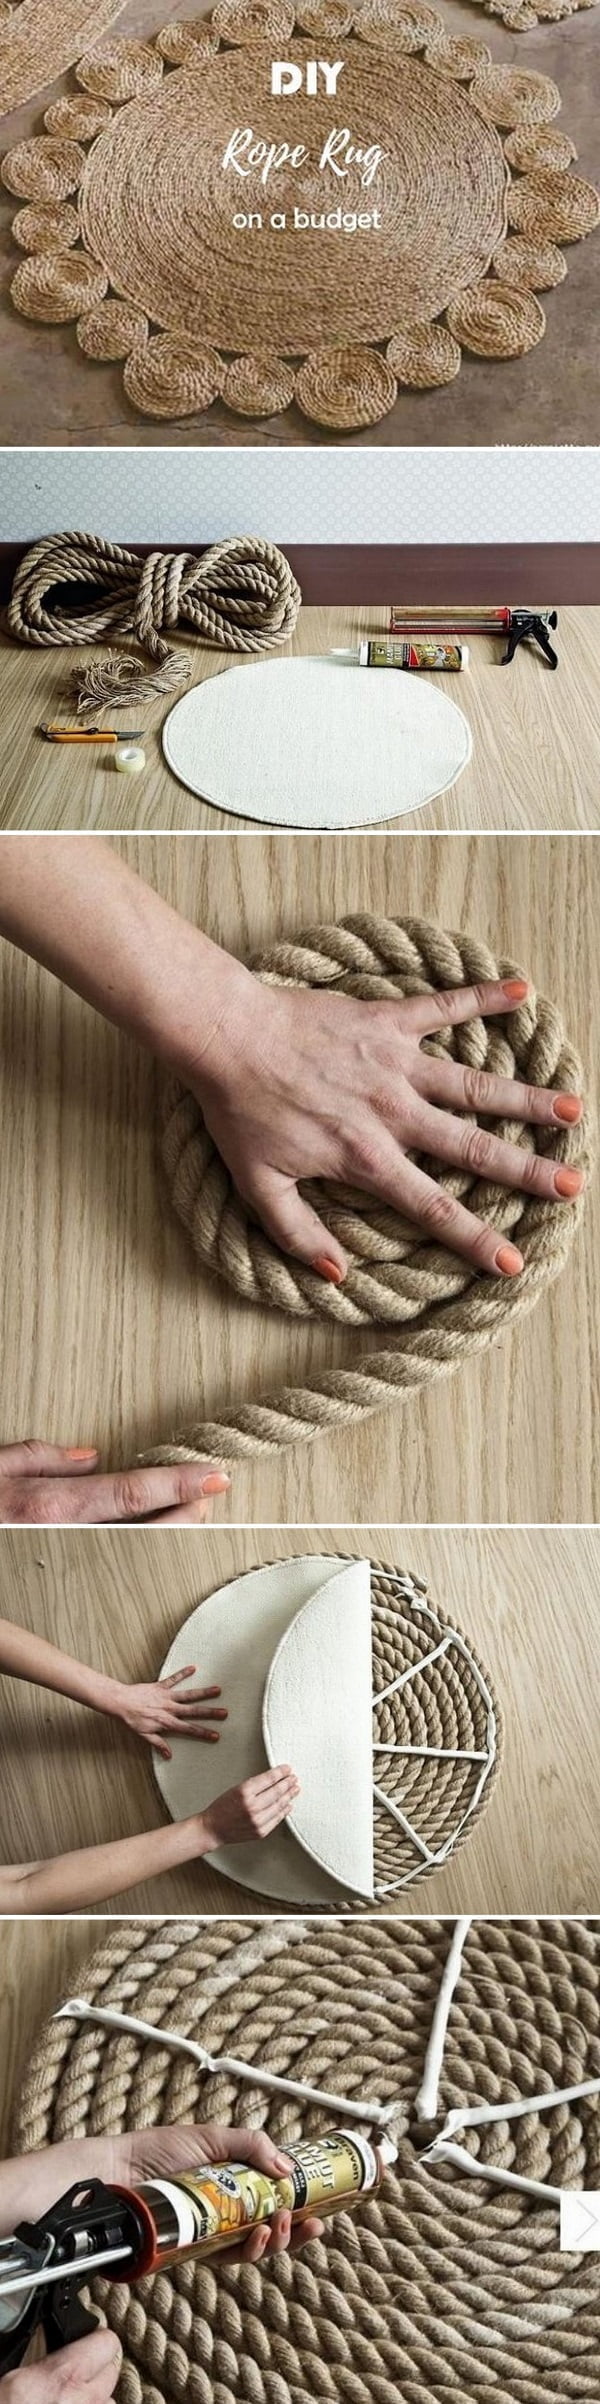 How to make a  rope rug for   on a   